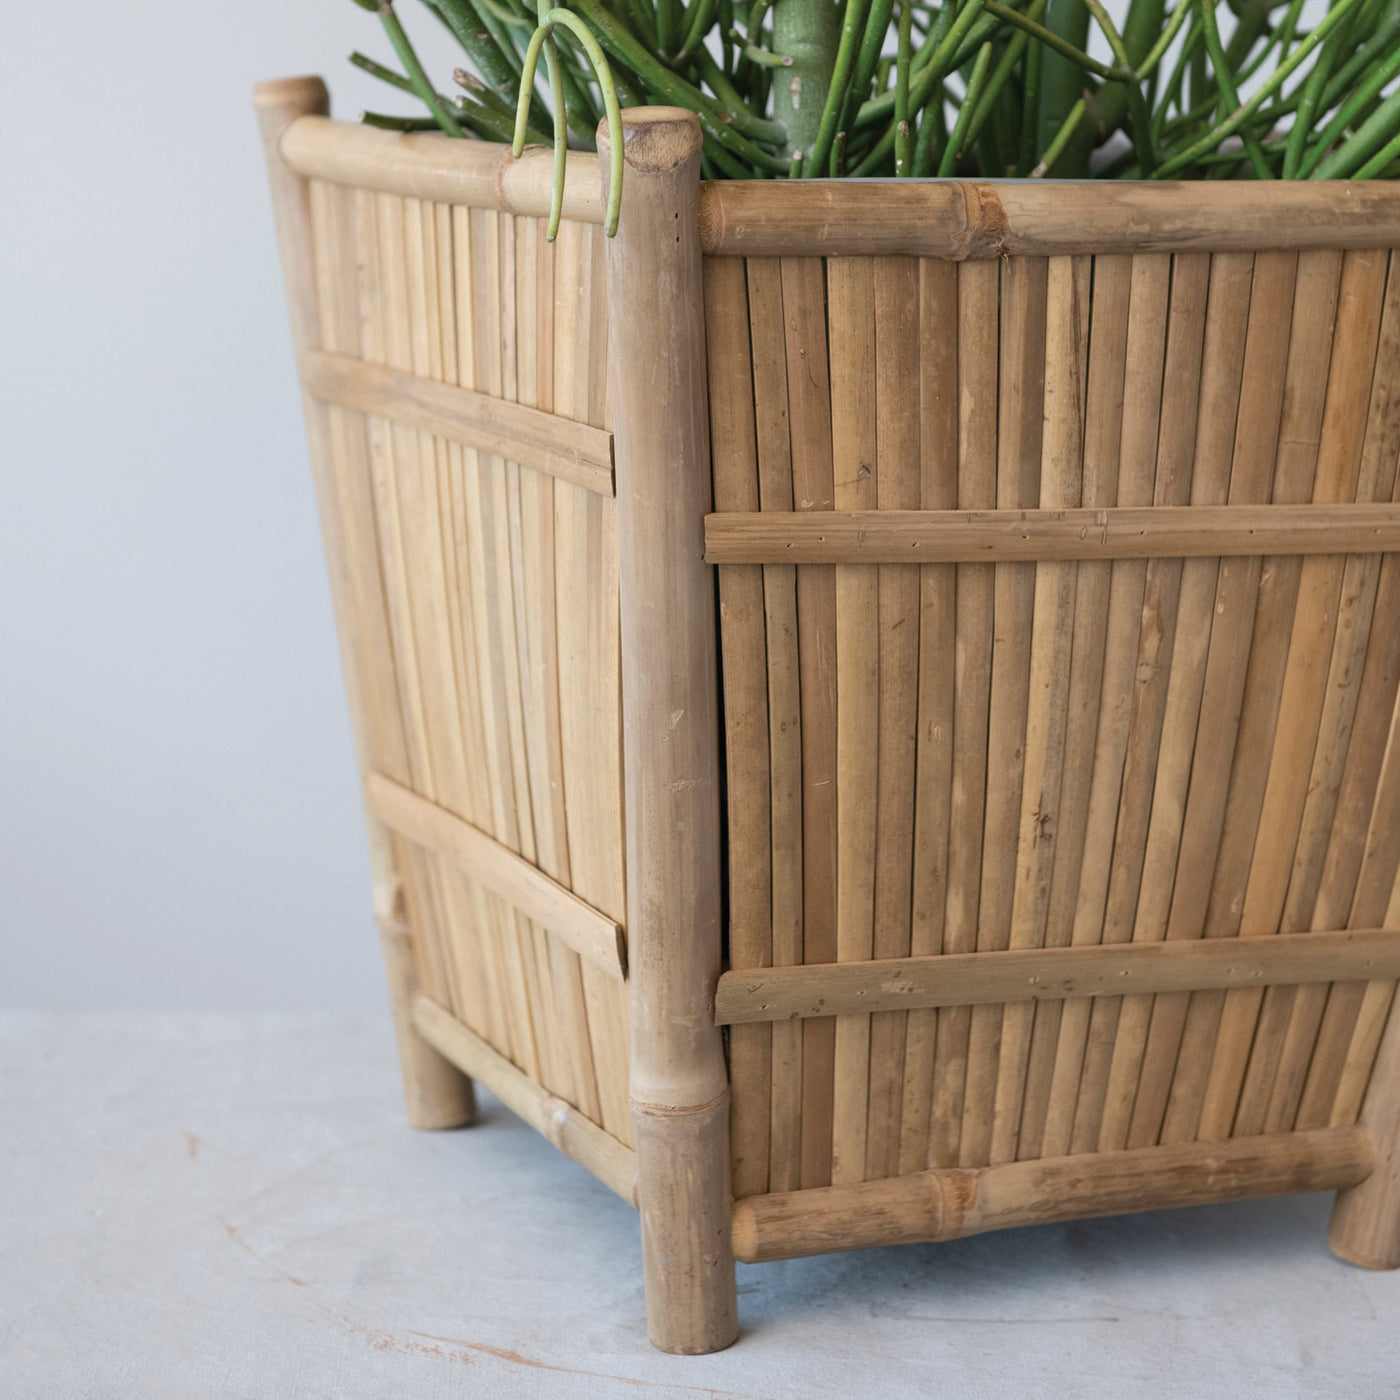 Handmade Bamboo Footed Planter w/ Plastic Liner